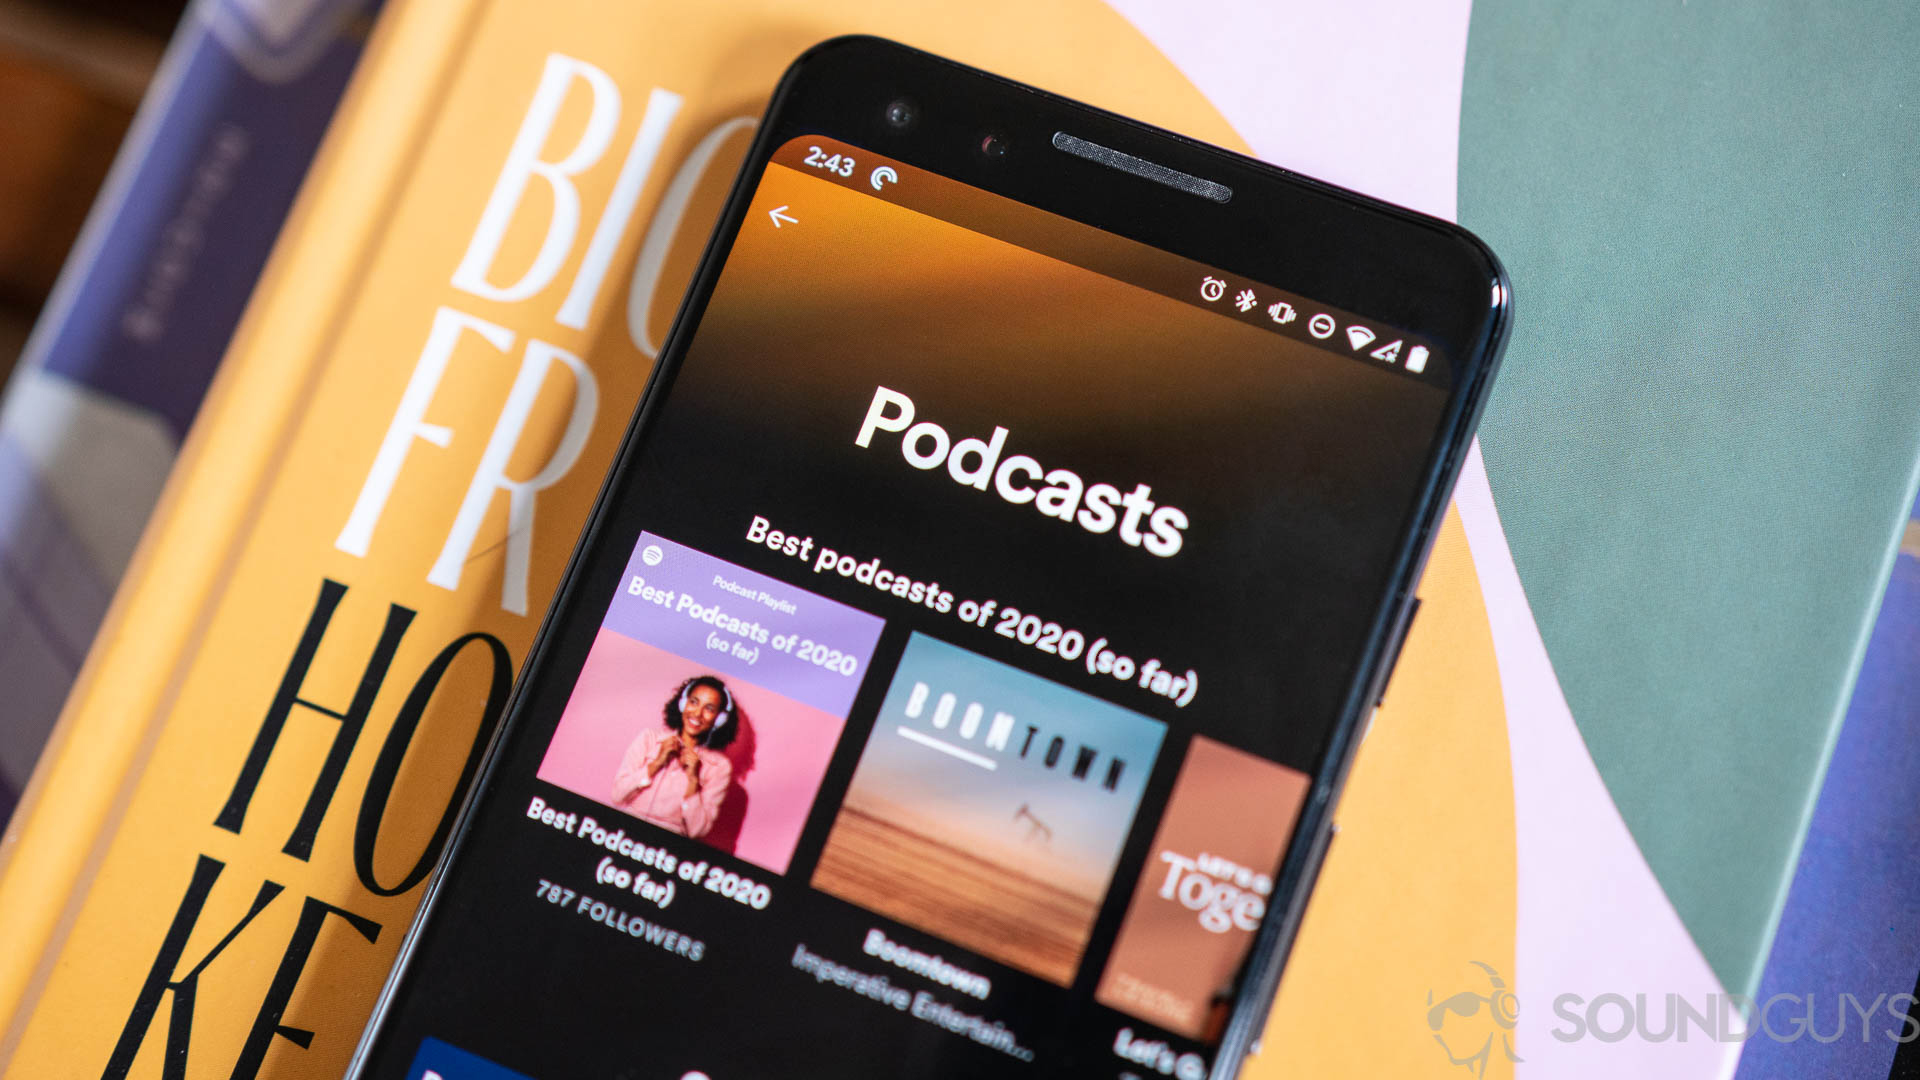 Close-up of podcast section on Spotify app in iOS.